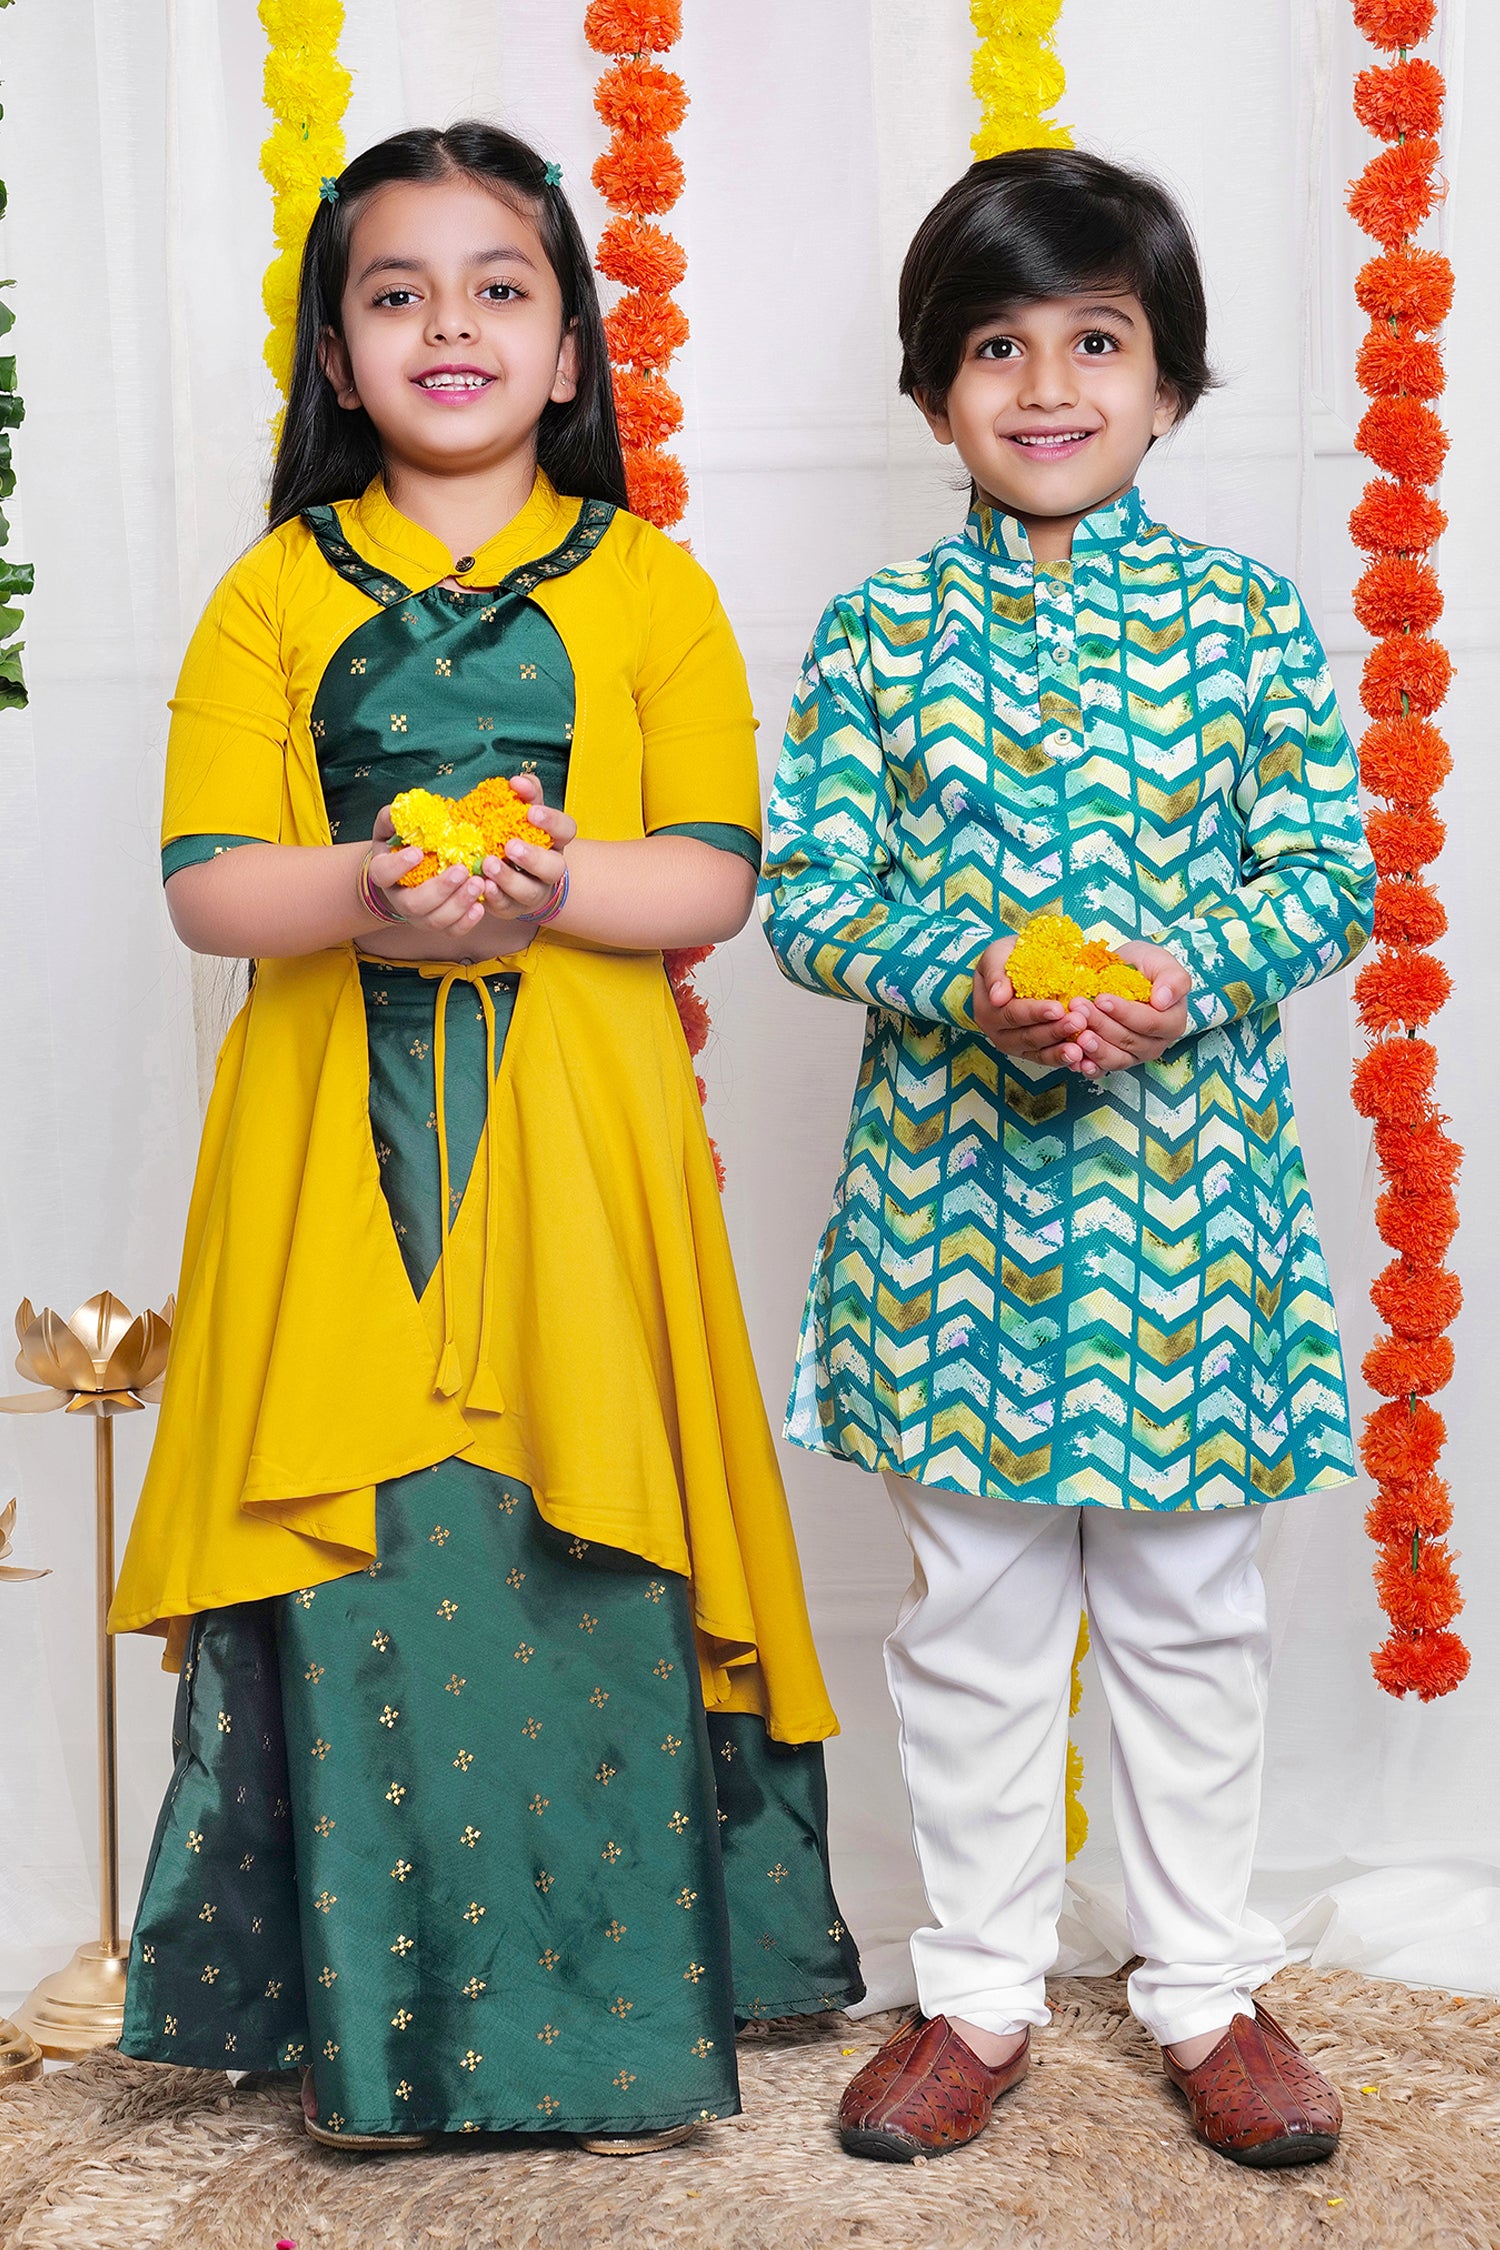 Buy Siblings Matching Outfits | Brother & Sister Matching Outfits Online -  KARMAPLACE.COM